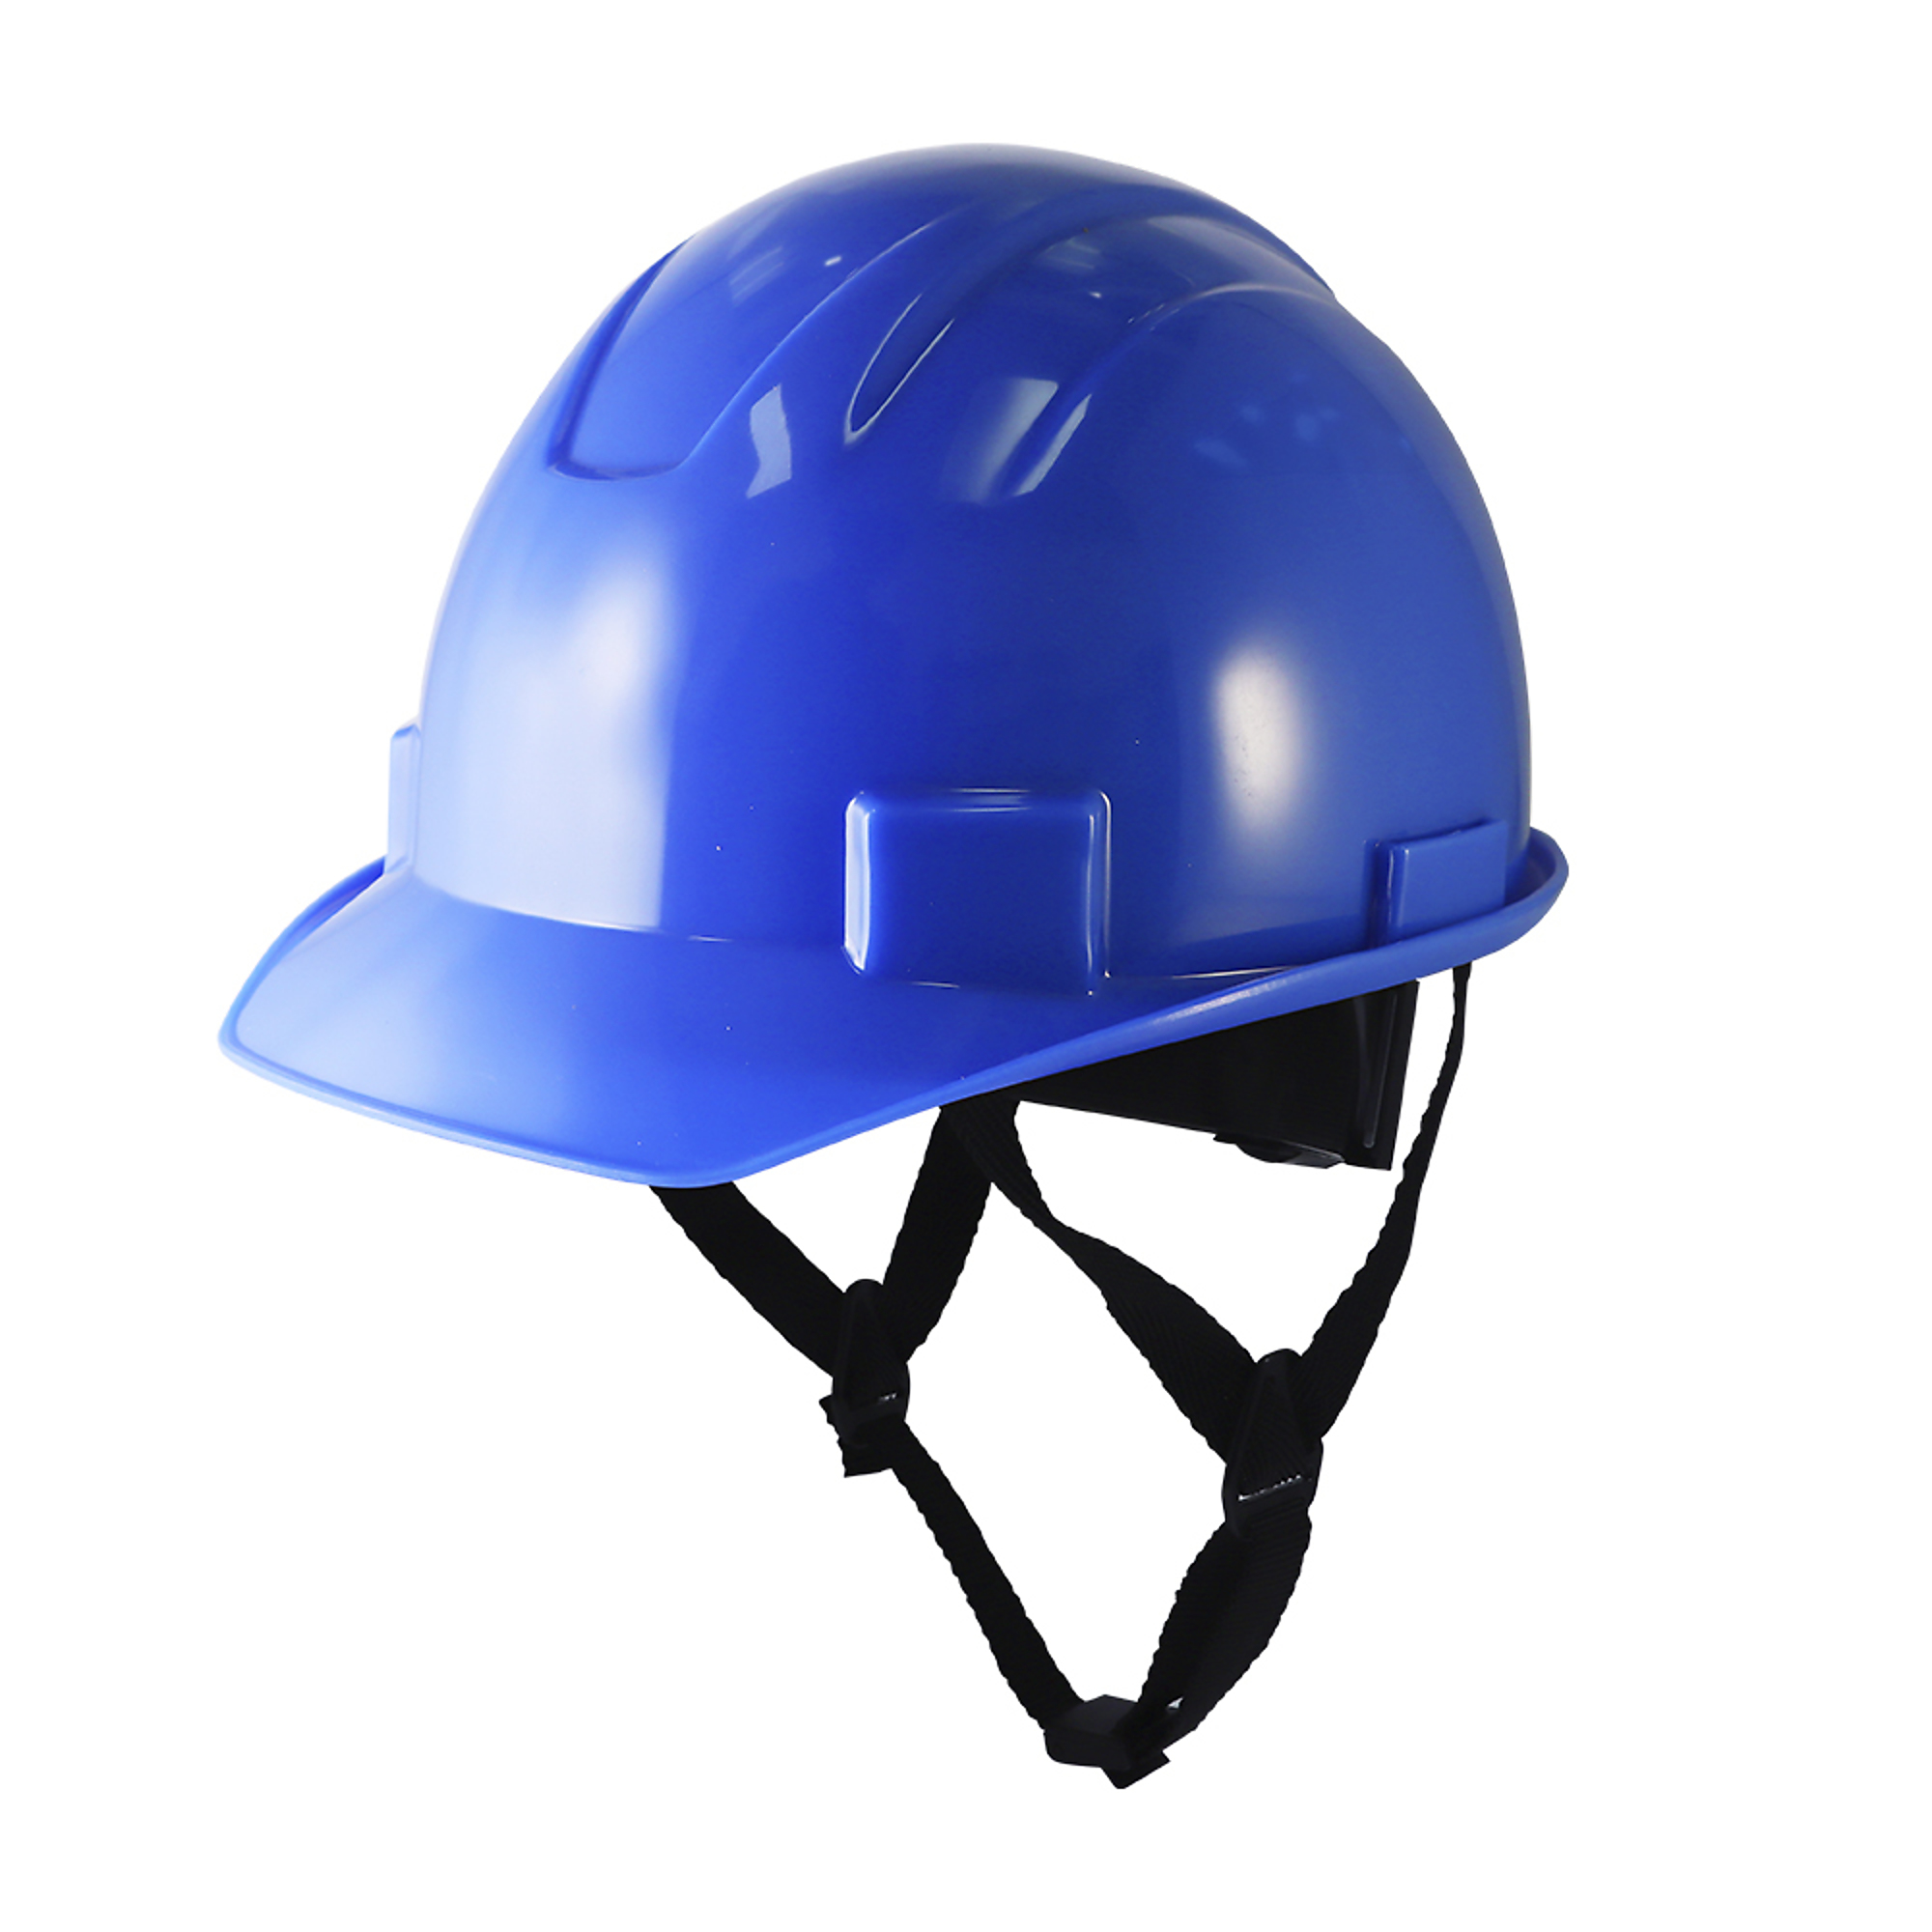 General Electric, Safety Helmet- Non-Vented- Blue, Hard Hat Style Helmet, Hat Size One Size, Color Blue, Model GH327B